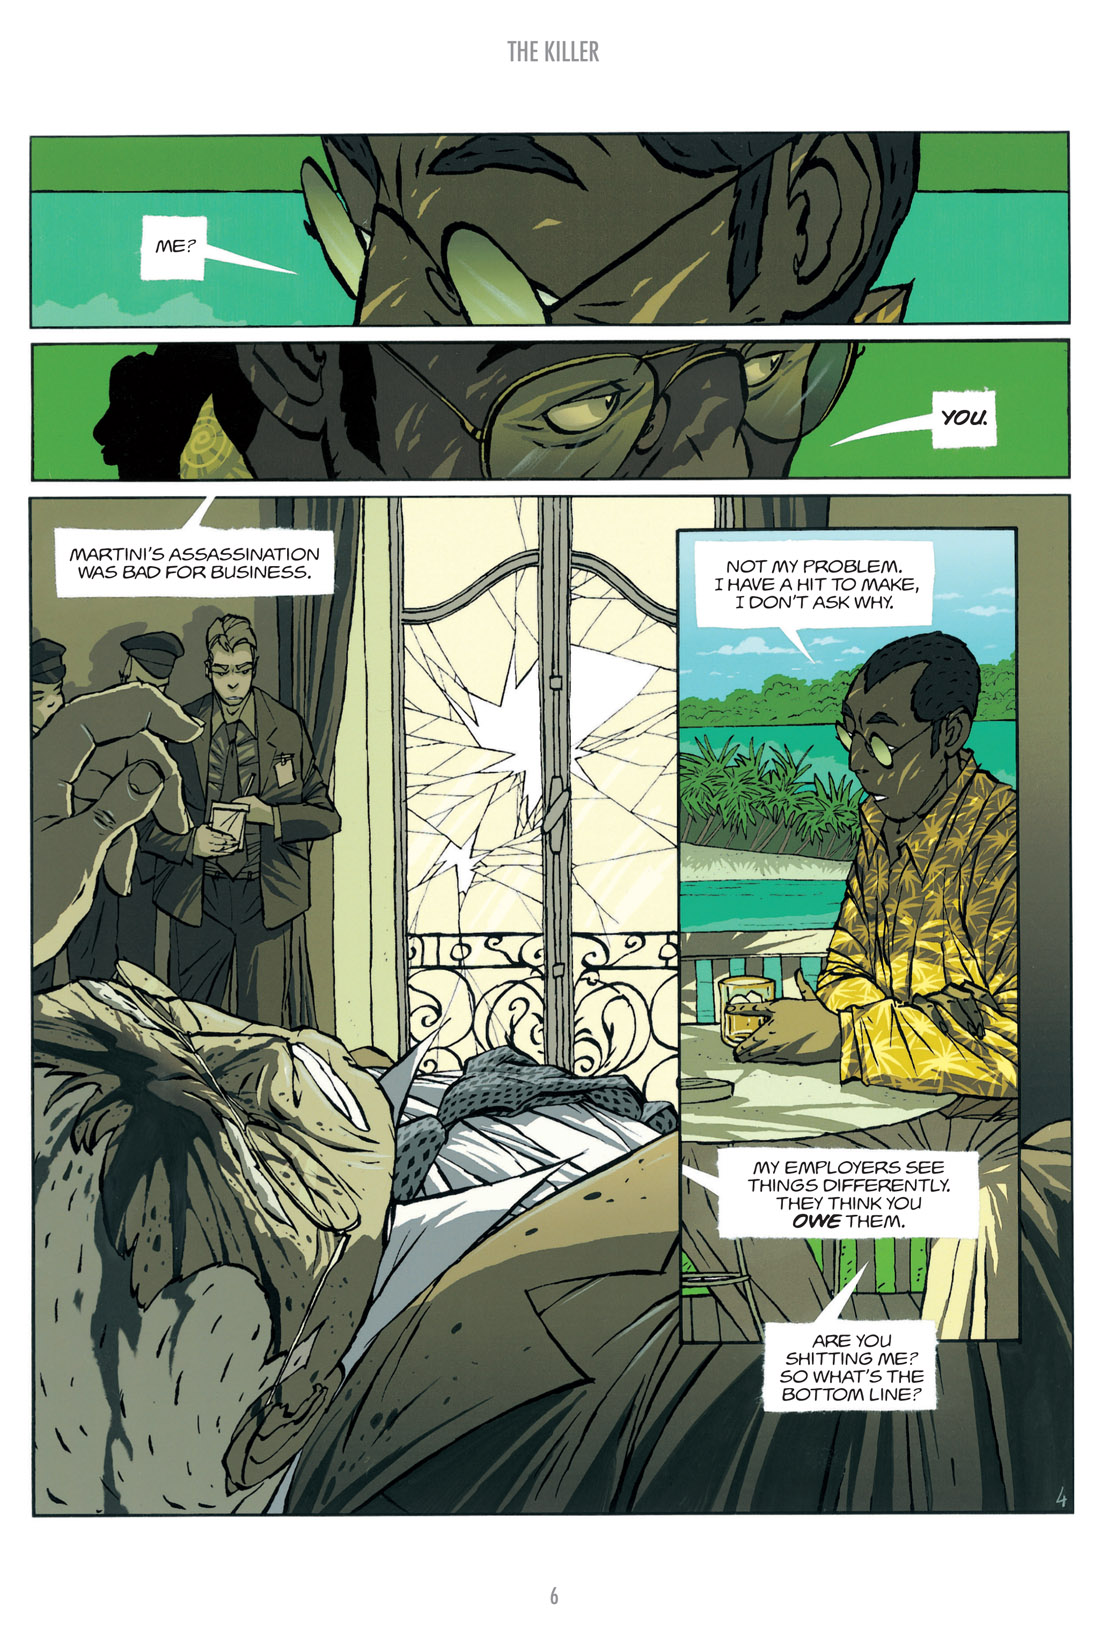 Read online The Killer comic -  Issue # TPB 2 - 13